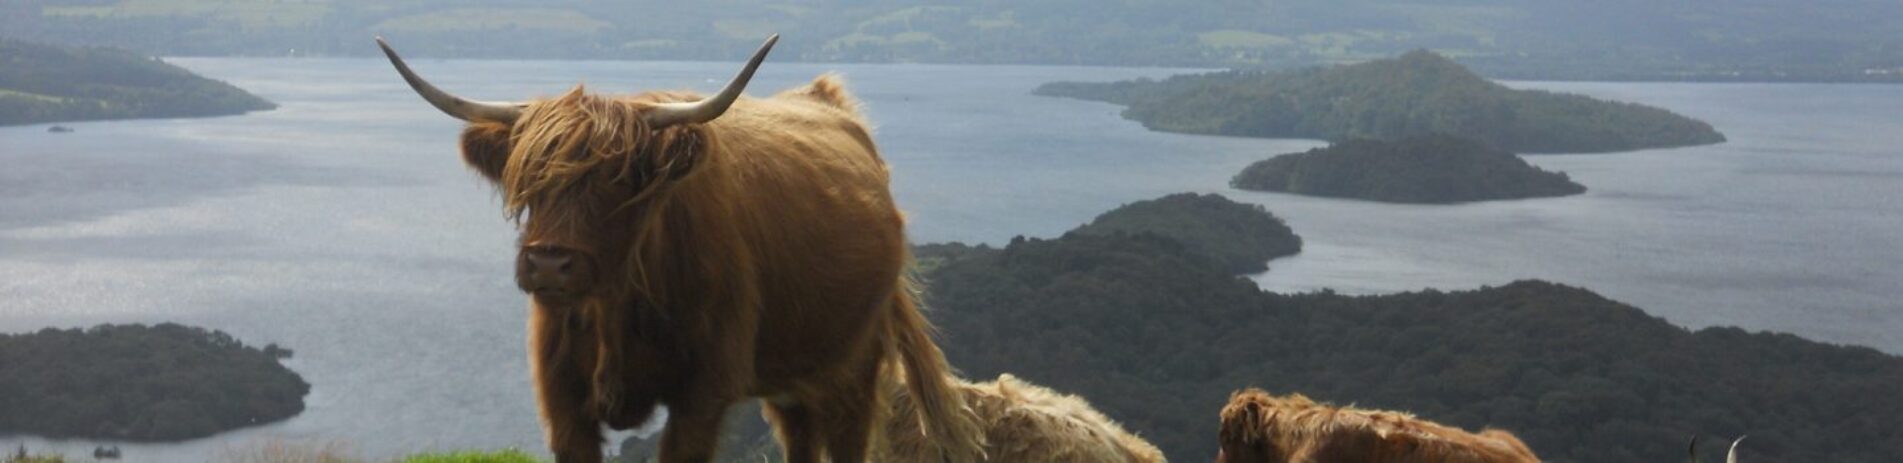 group-of-highland-cows-on-slopes-of-conic-hill-with-loch-lomond-and-islands-in-the-background